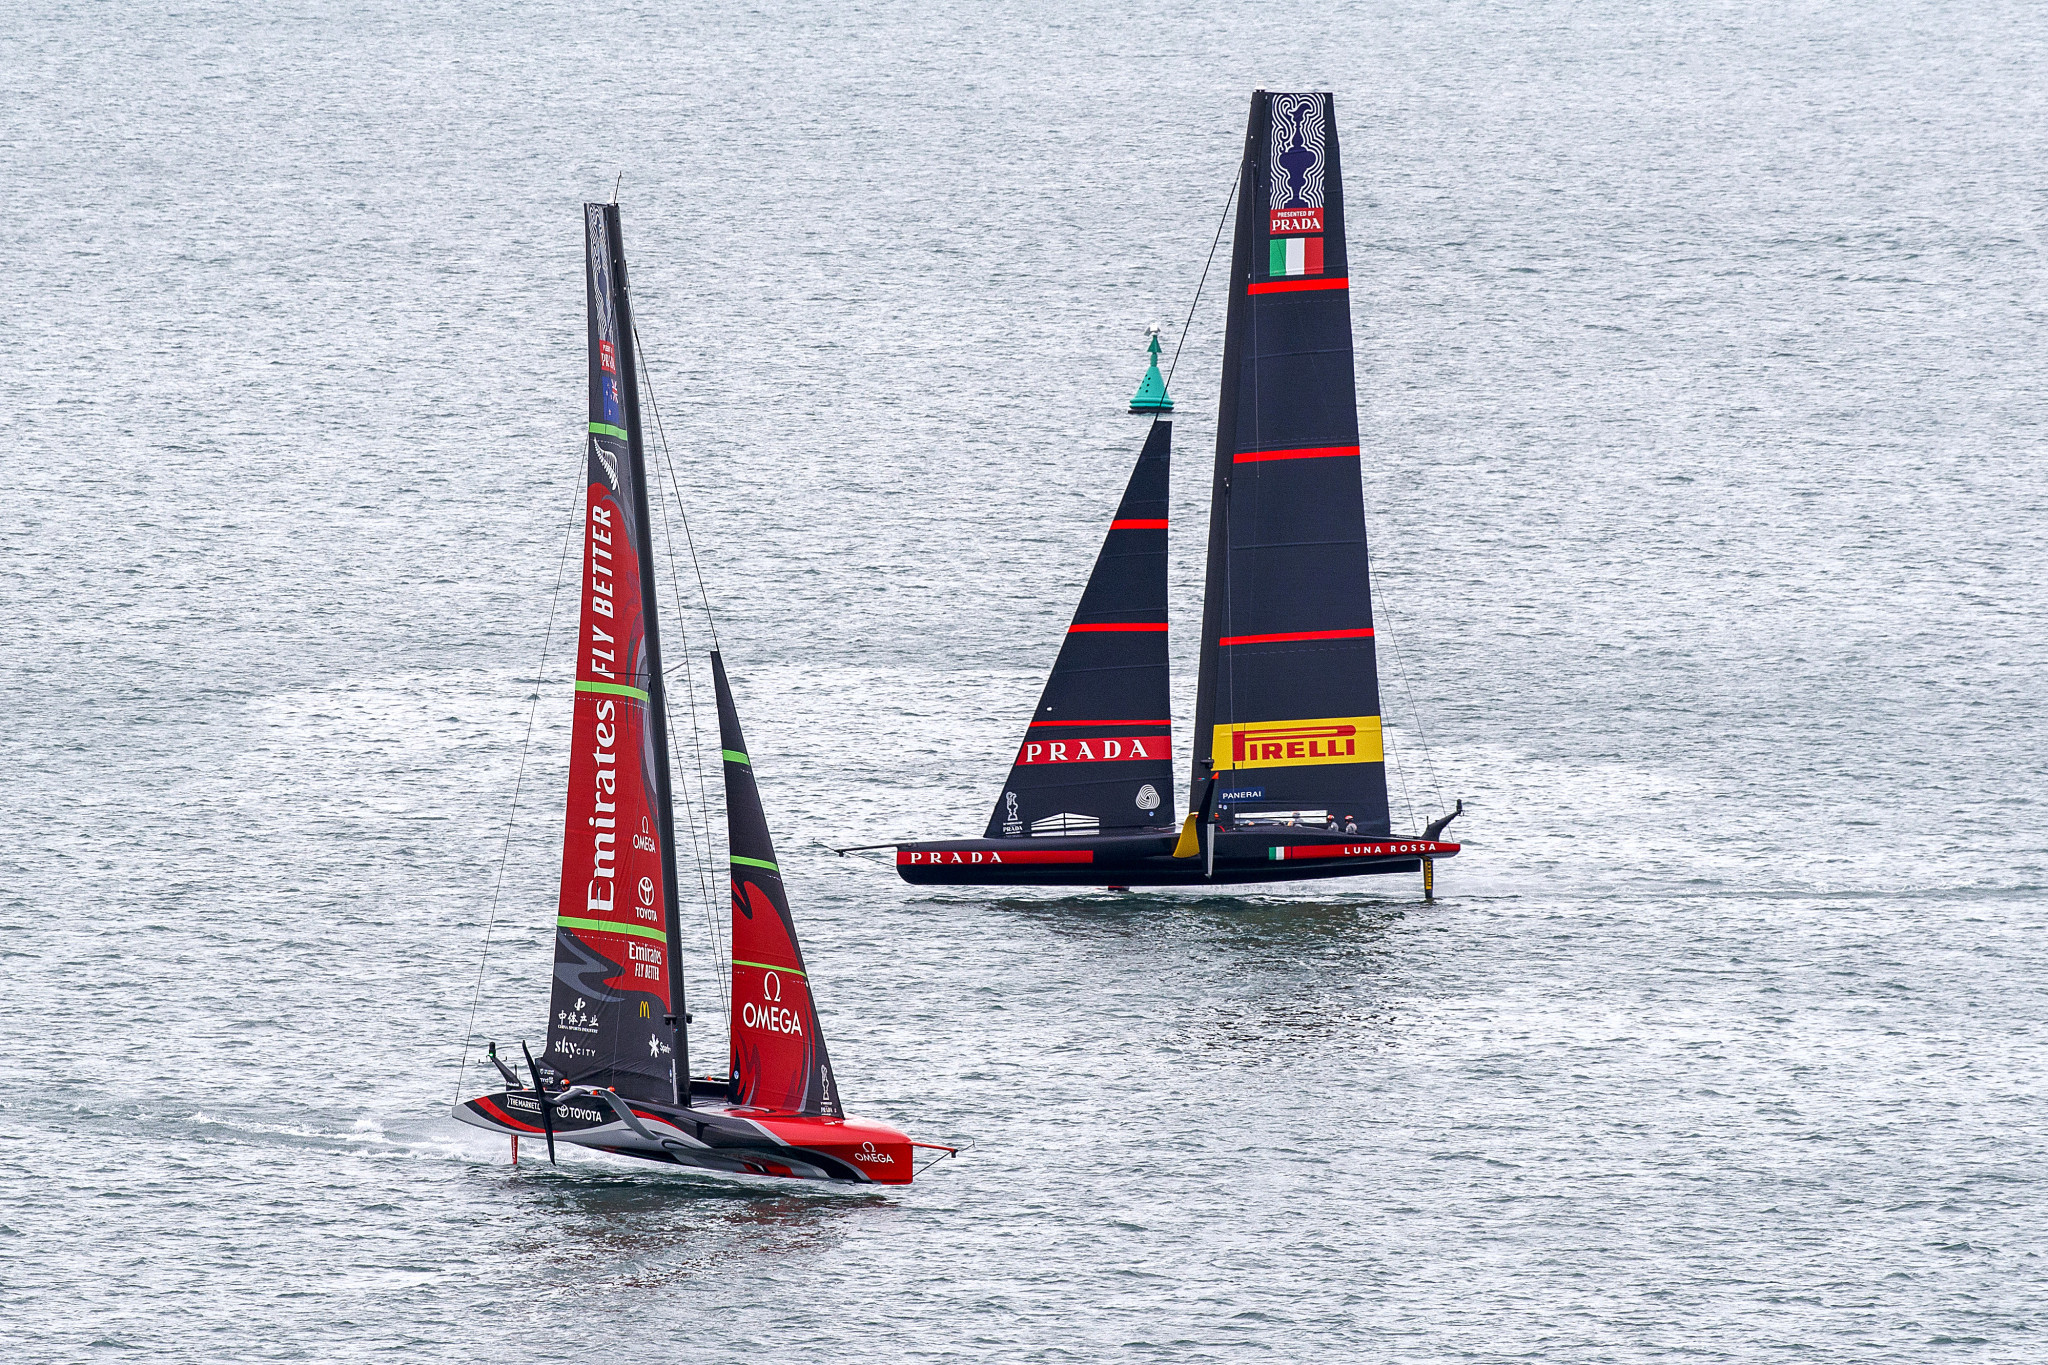 Team New Zealand on brink of retaining America’s Cup after fourth straight win